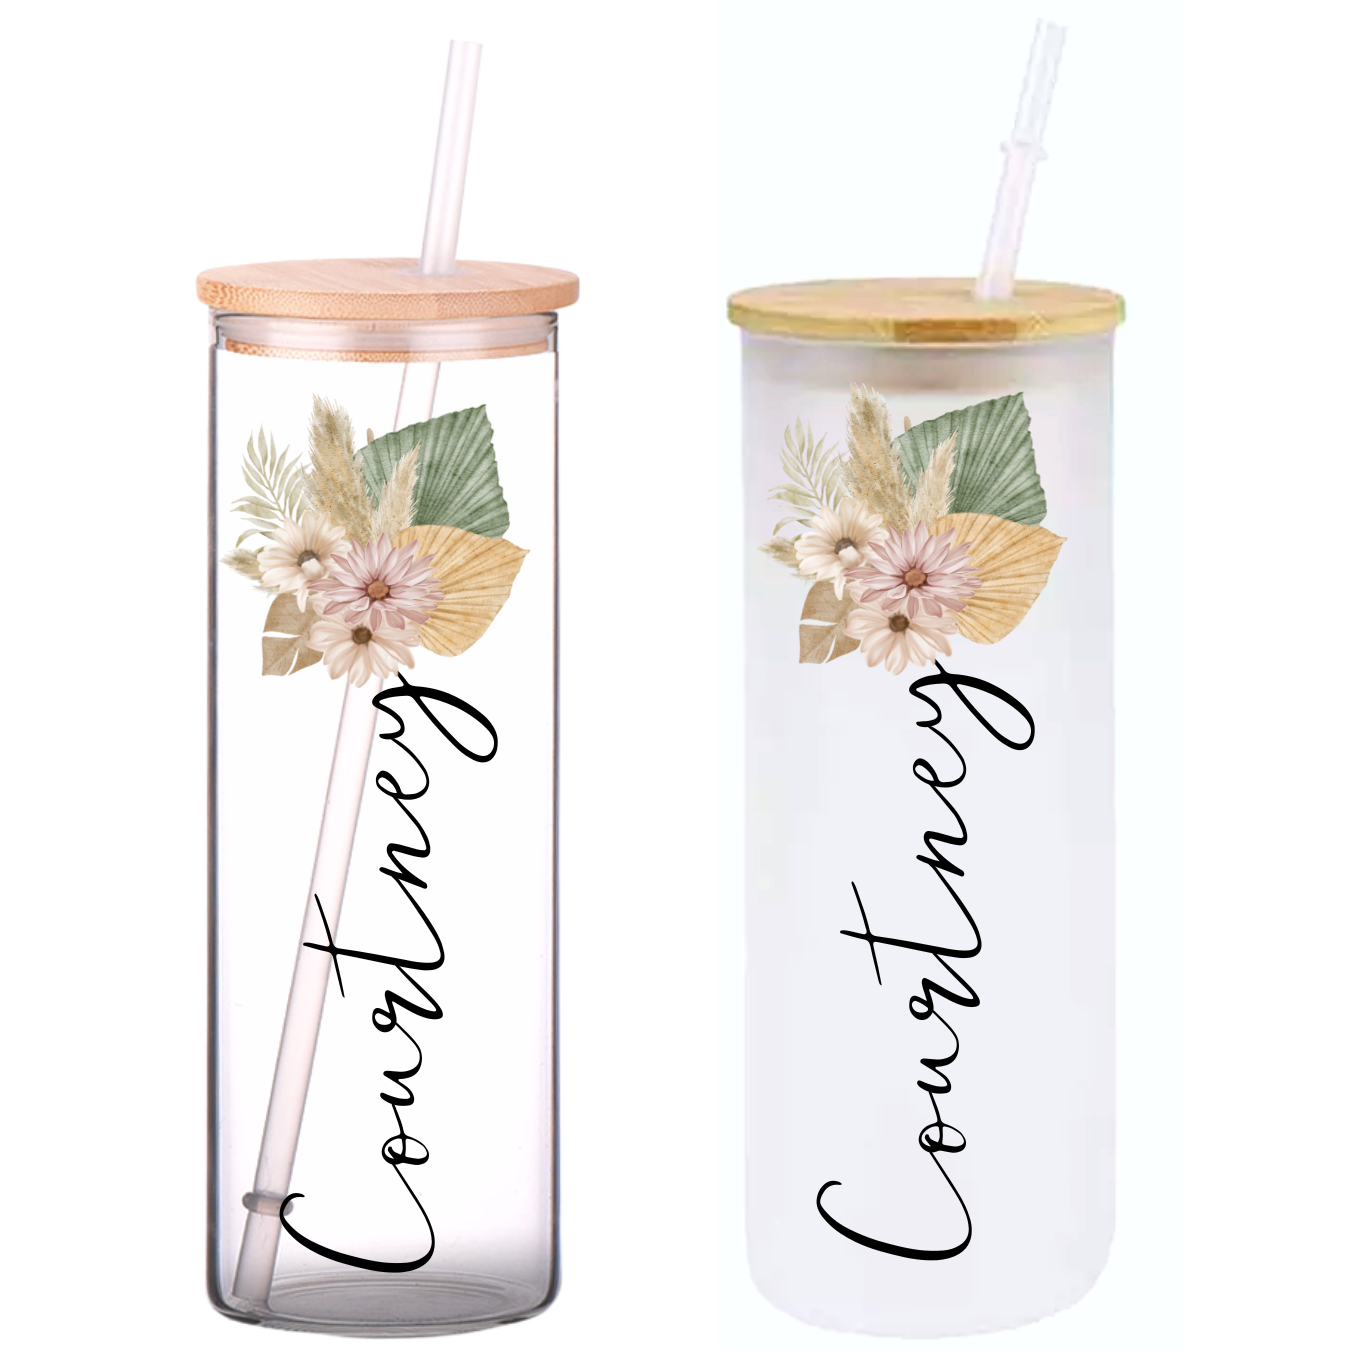 Choose Happiness Glass Tumbler with Bamboo Lid & Straw for Iced Coffee –  Modern Lifestyle Gifts